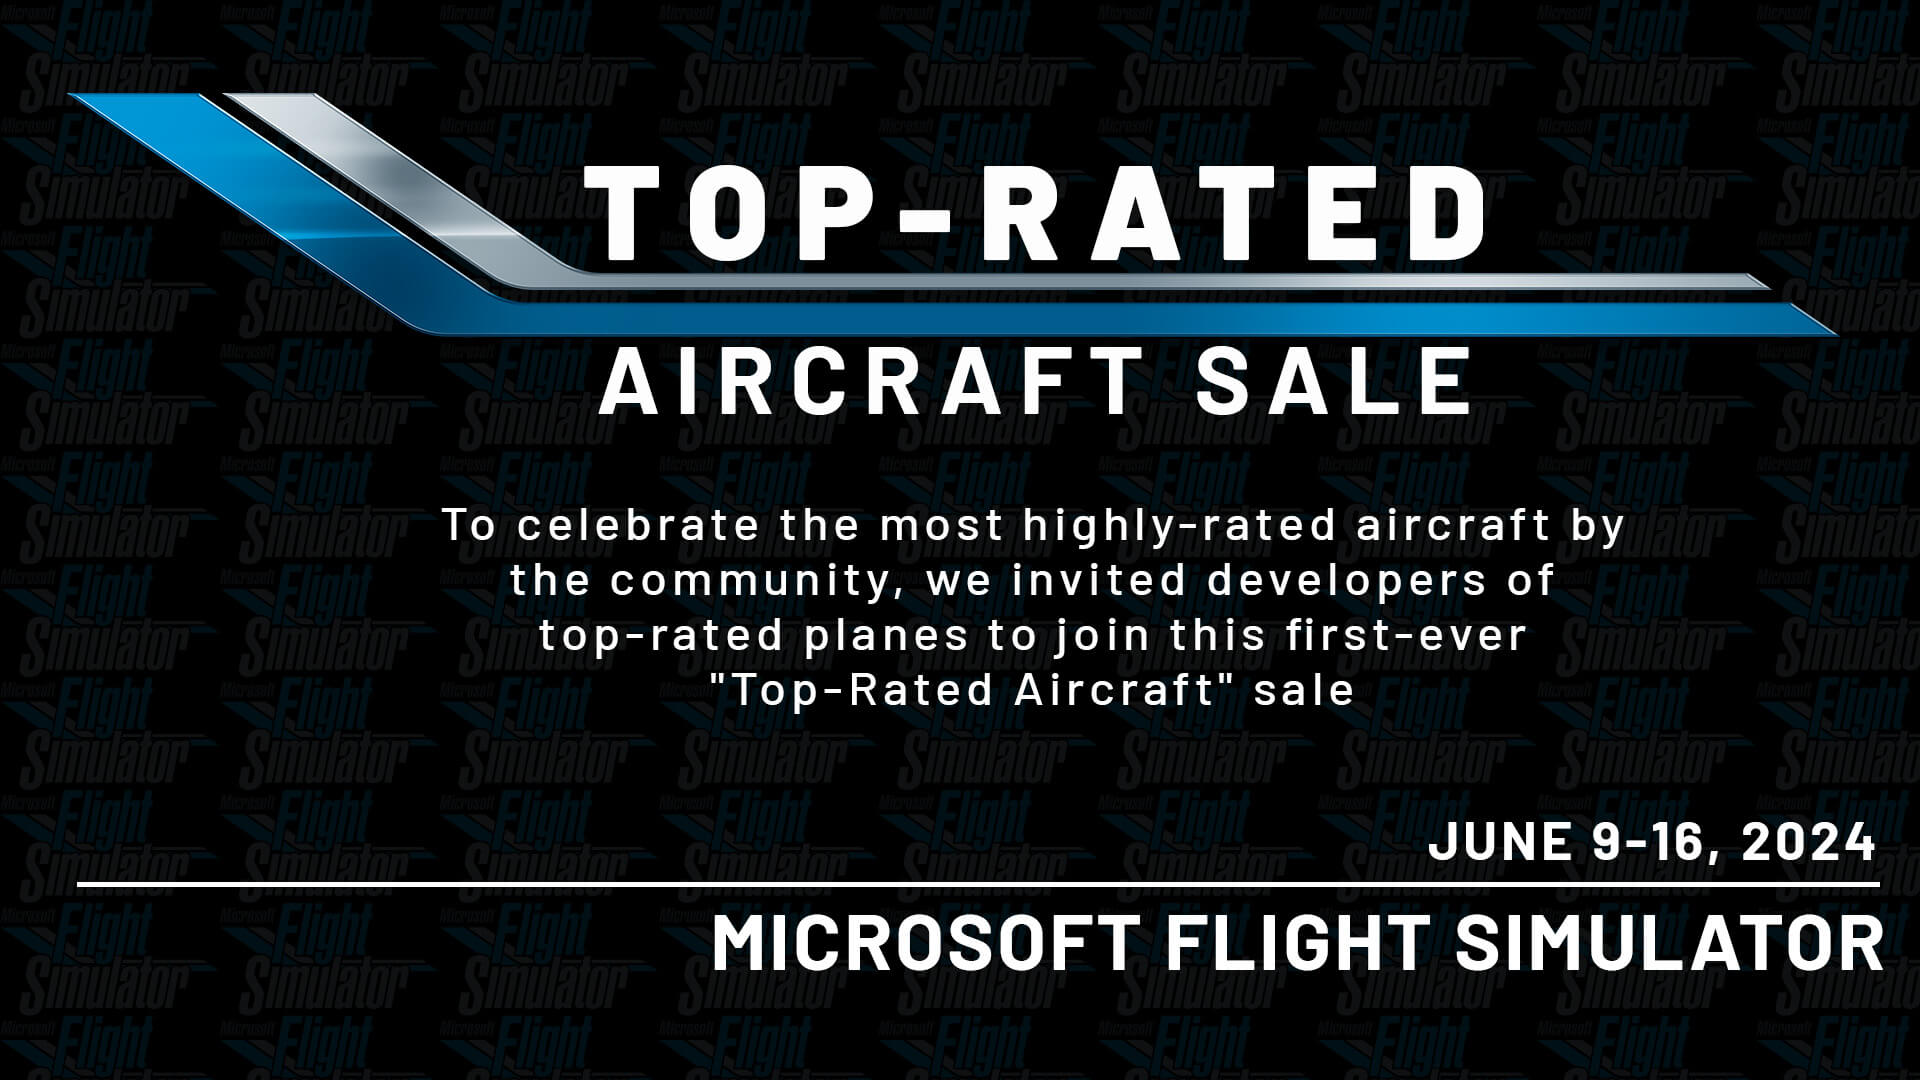 Top-Rated Aircraft Sale June 9-16, 2024